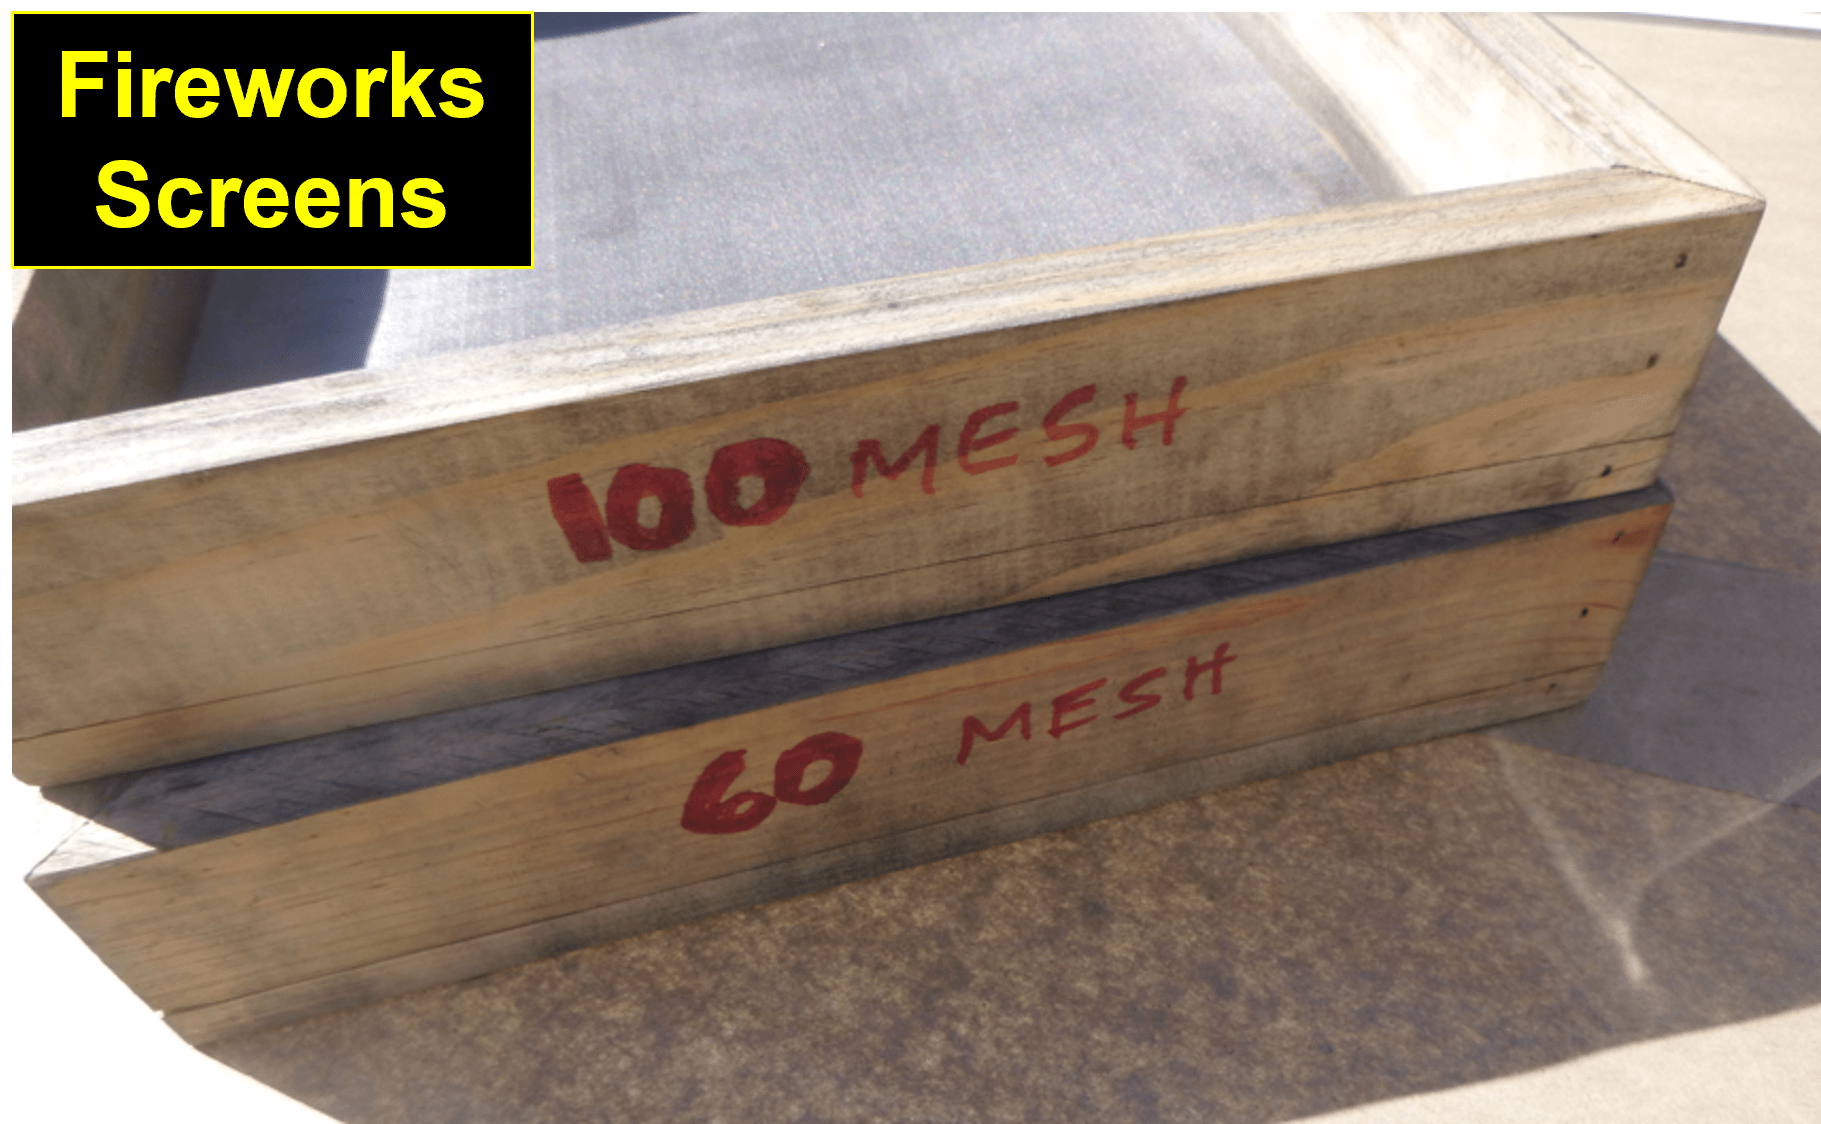 100 and 60 mesh screens for making fireworks